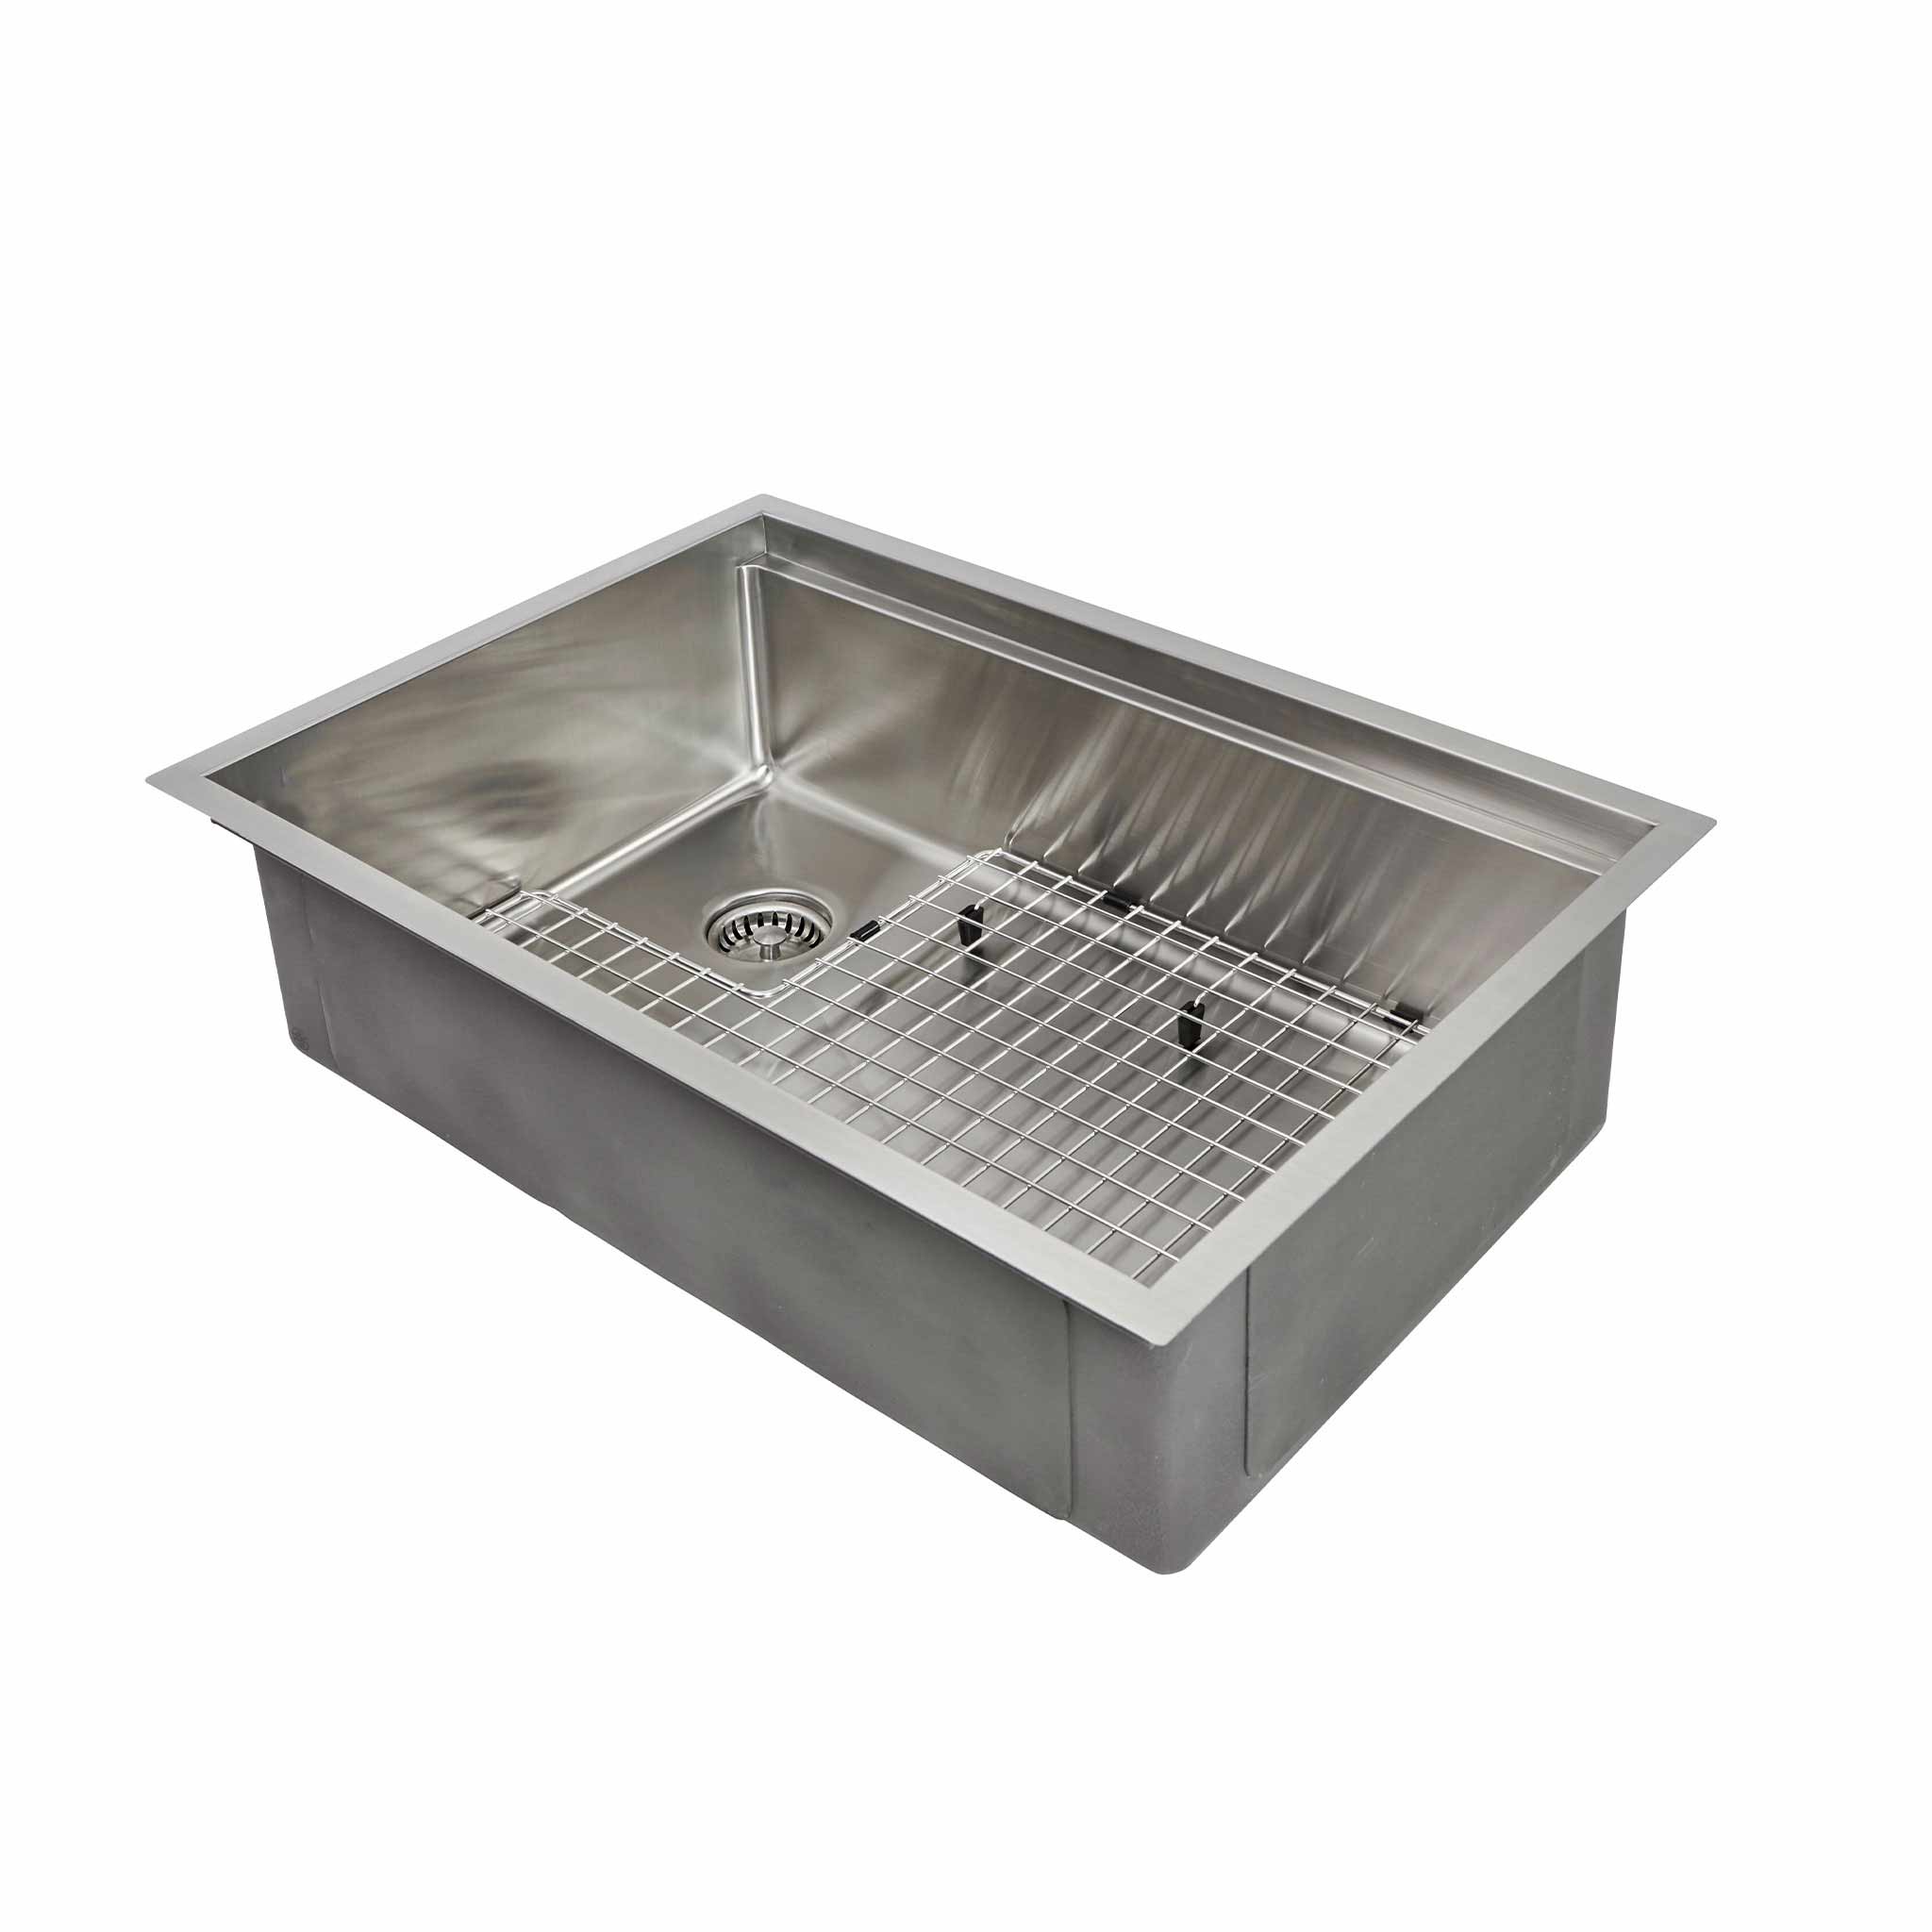 28 inch workstation sink with stainless steel sink grid and a left, offset drain and seamless drain design.